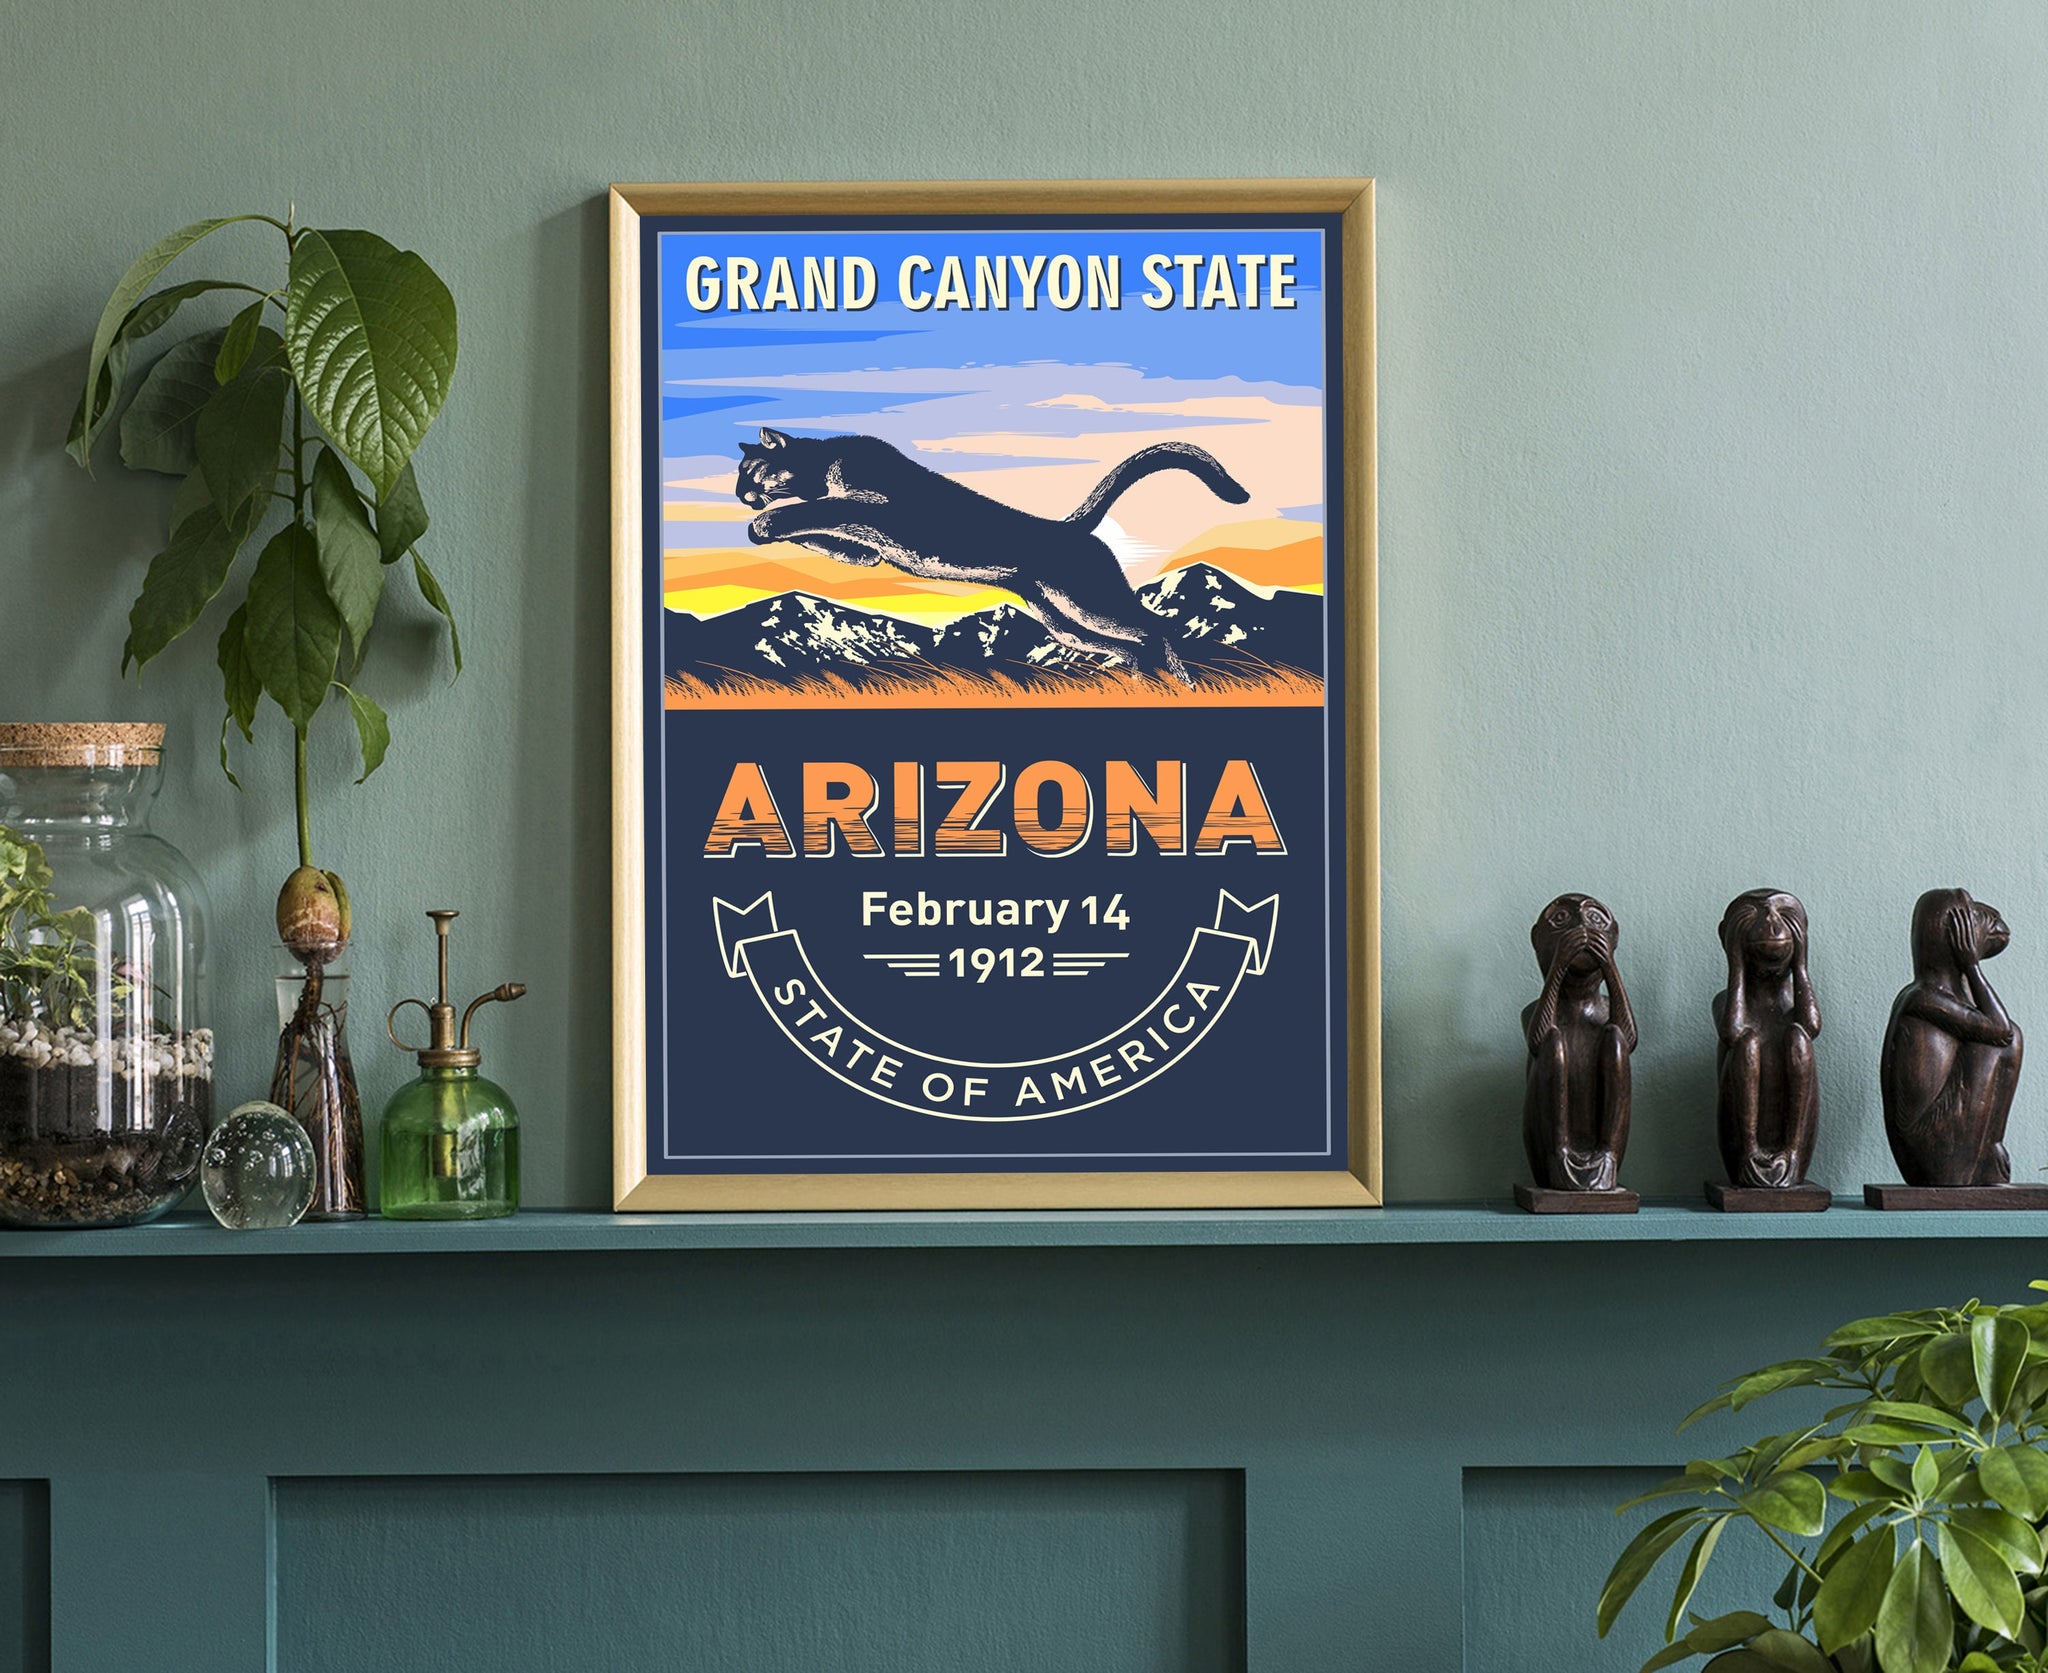 United States Arizona State Poster, Arizona Poster Print, Arizona State Emblem Poster, Retro Travel State Poster, Home and Office Wall Art